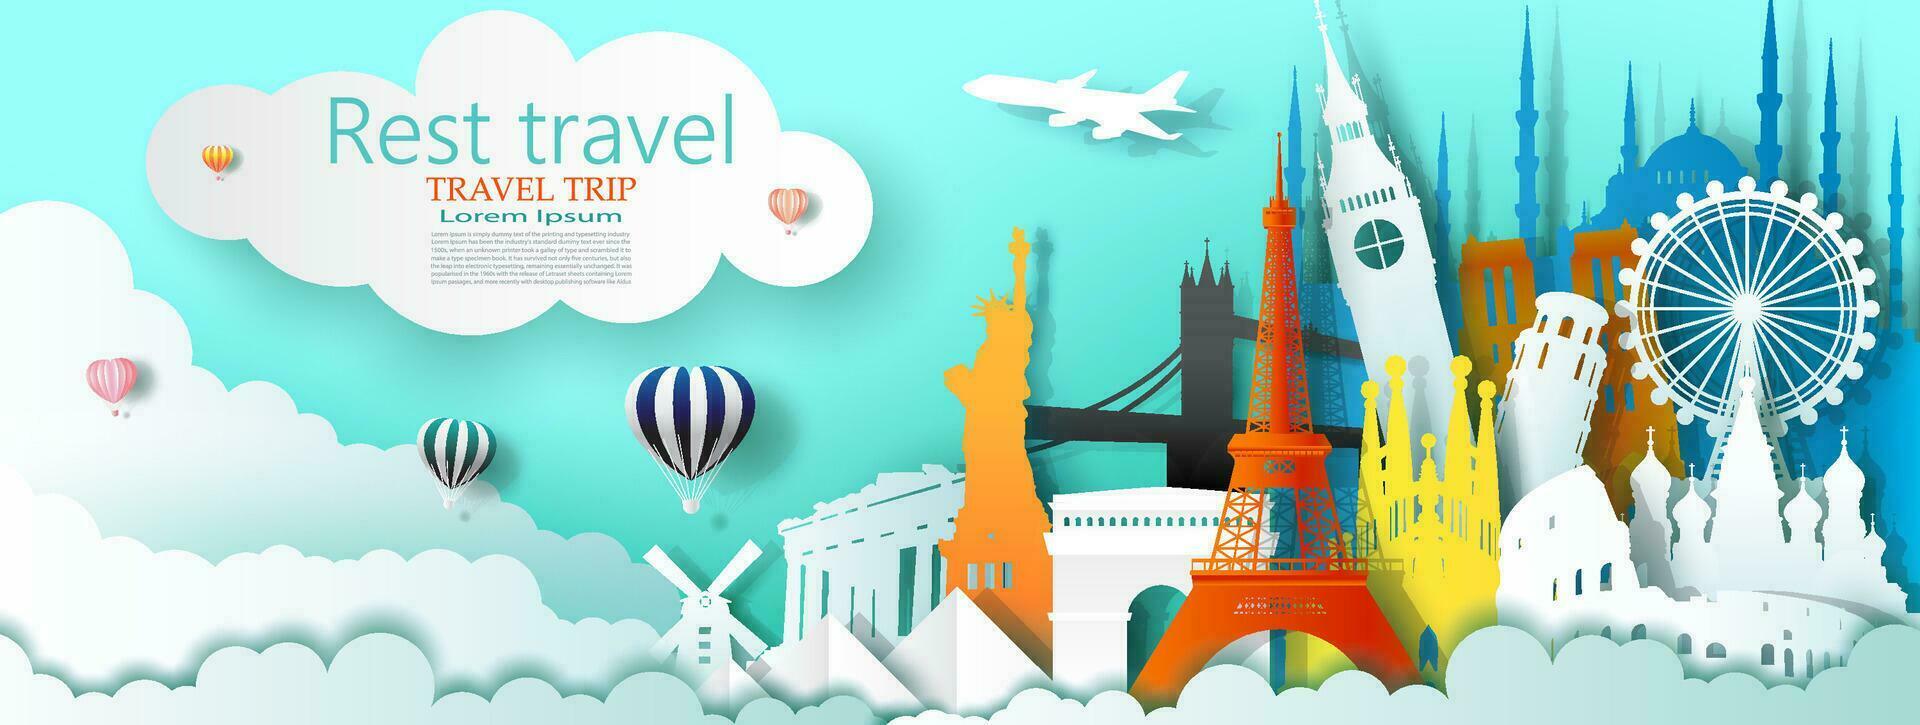 Travel business landmarks tourism world famous architecture for advertising. vector